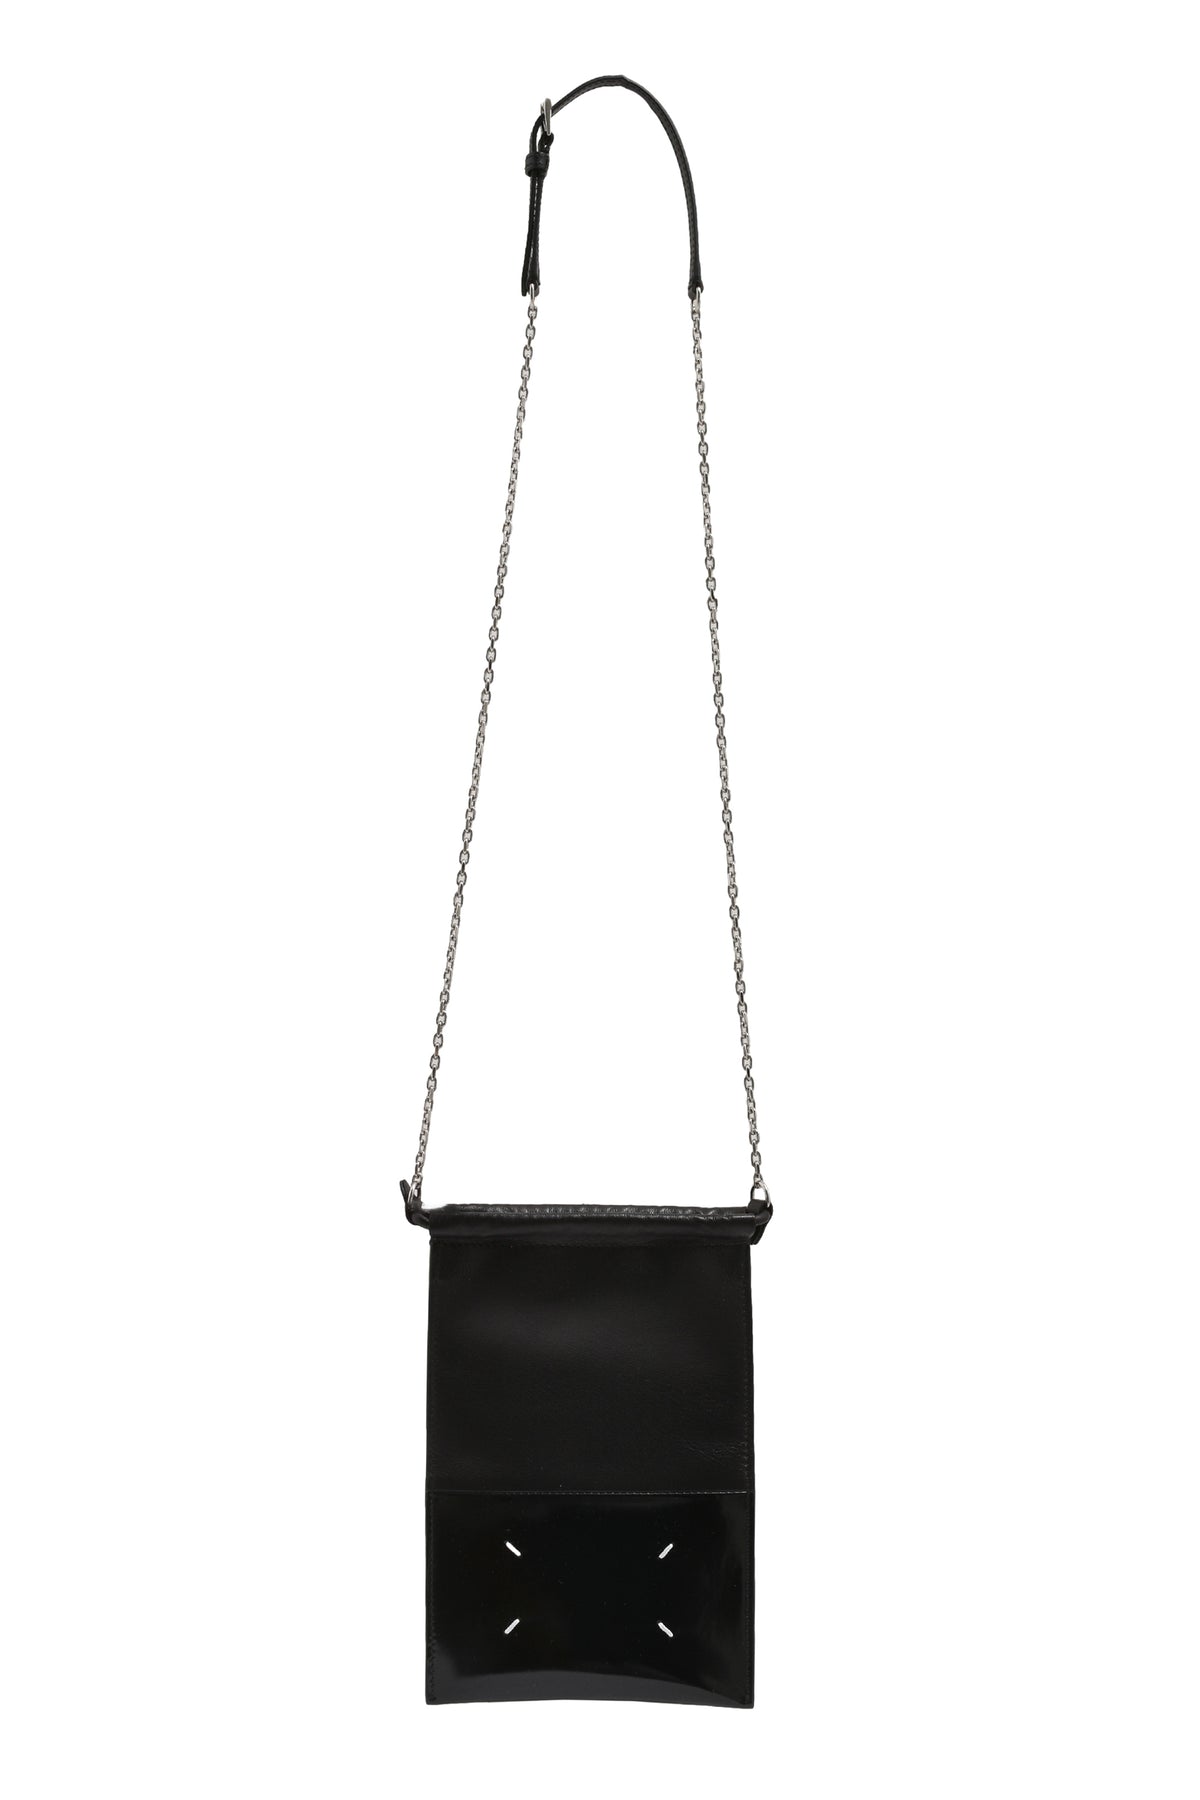 DRAWSTRING PHONE NECK POUCH WITH CHAIN / BLK